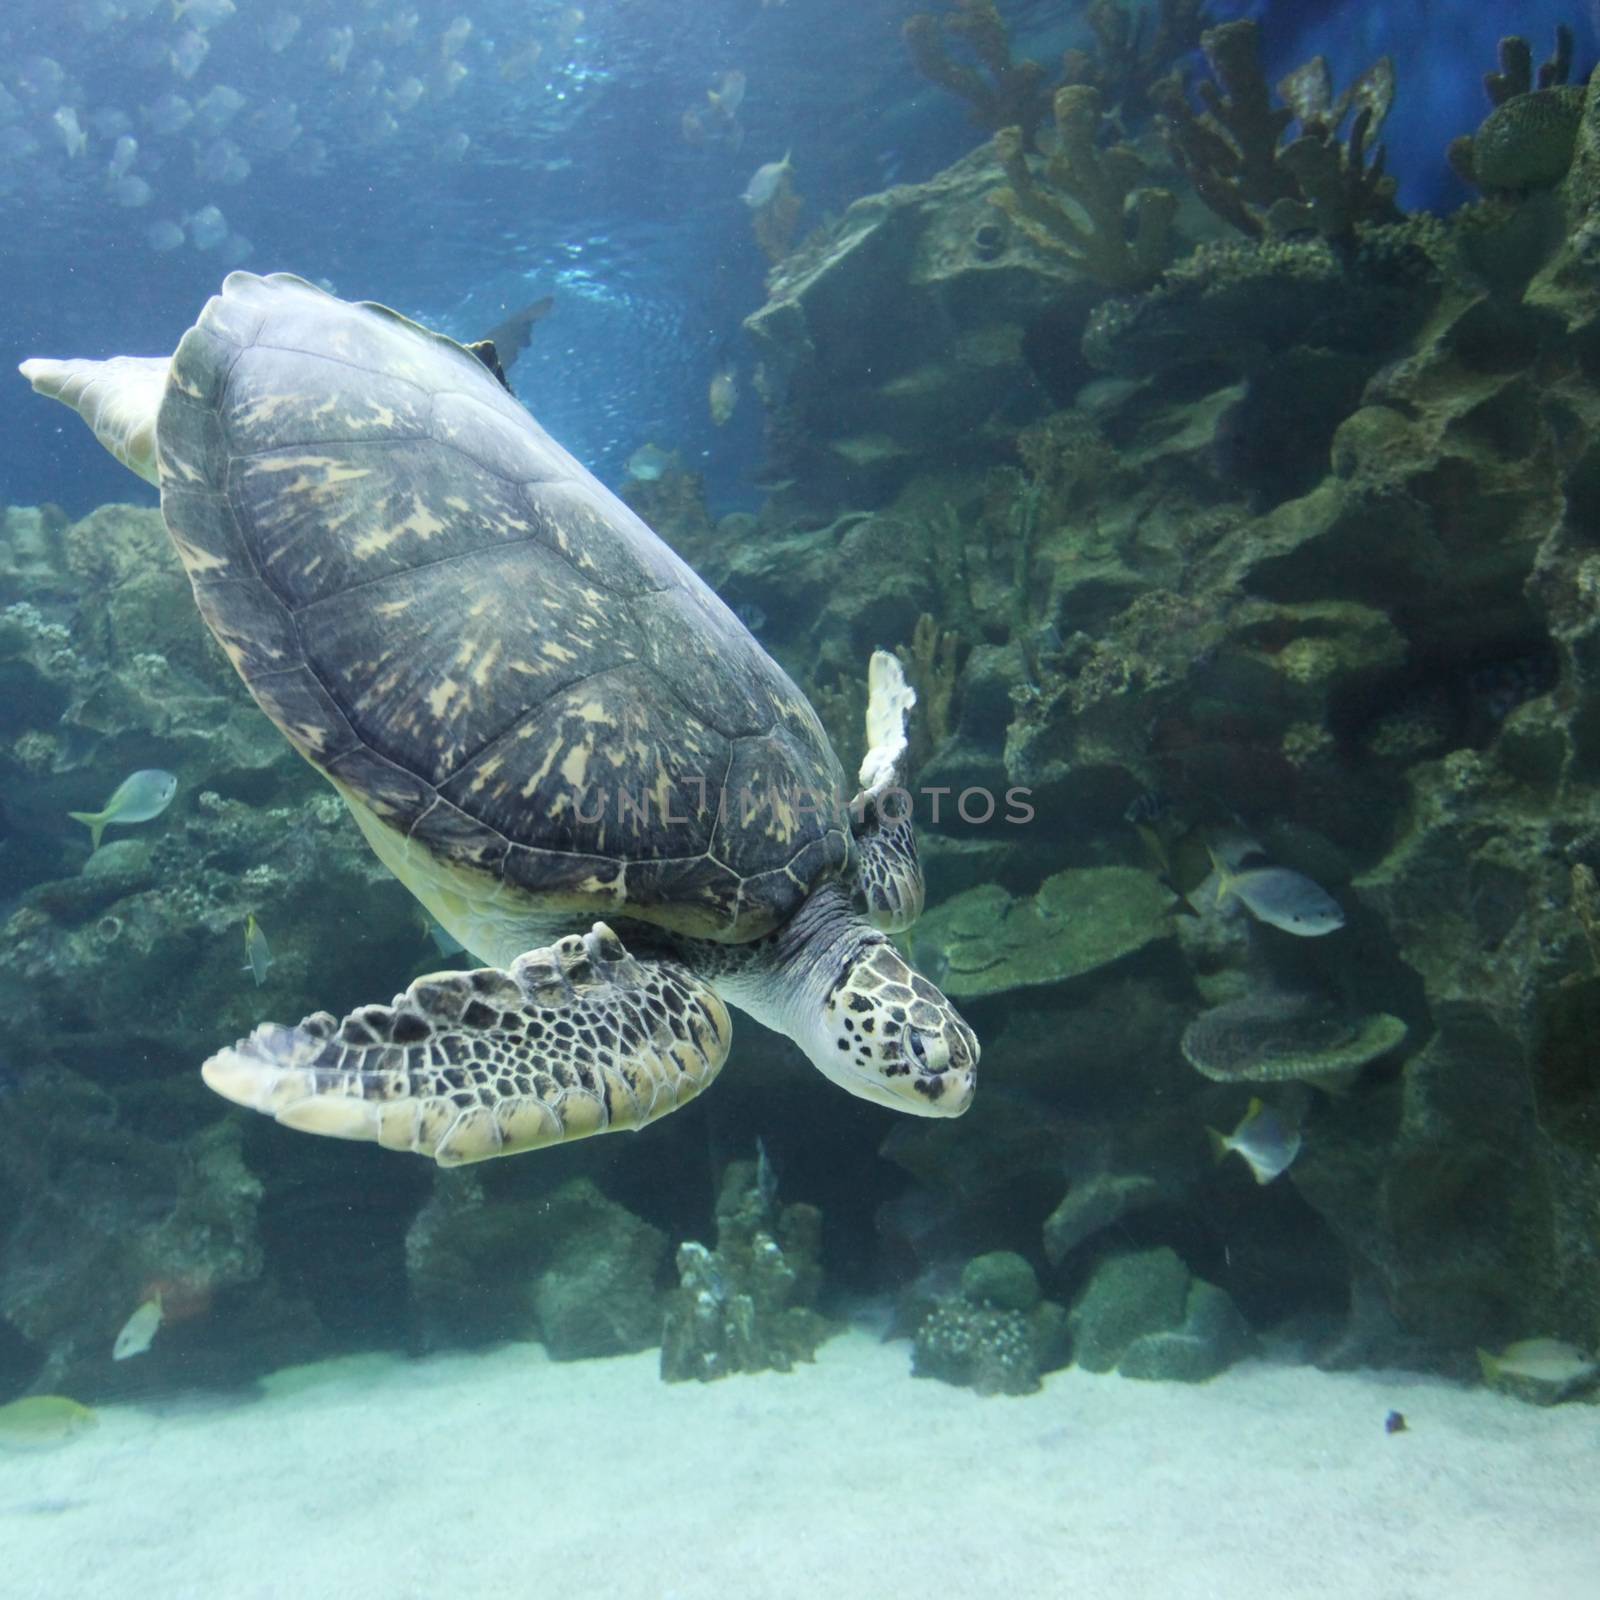 Underwater view of swimming turtle and small fish